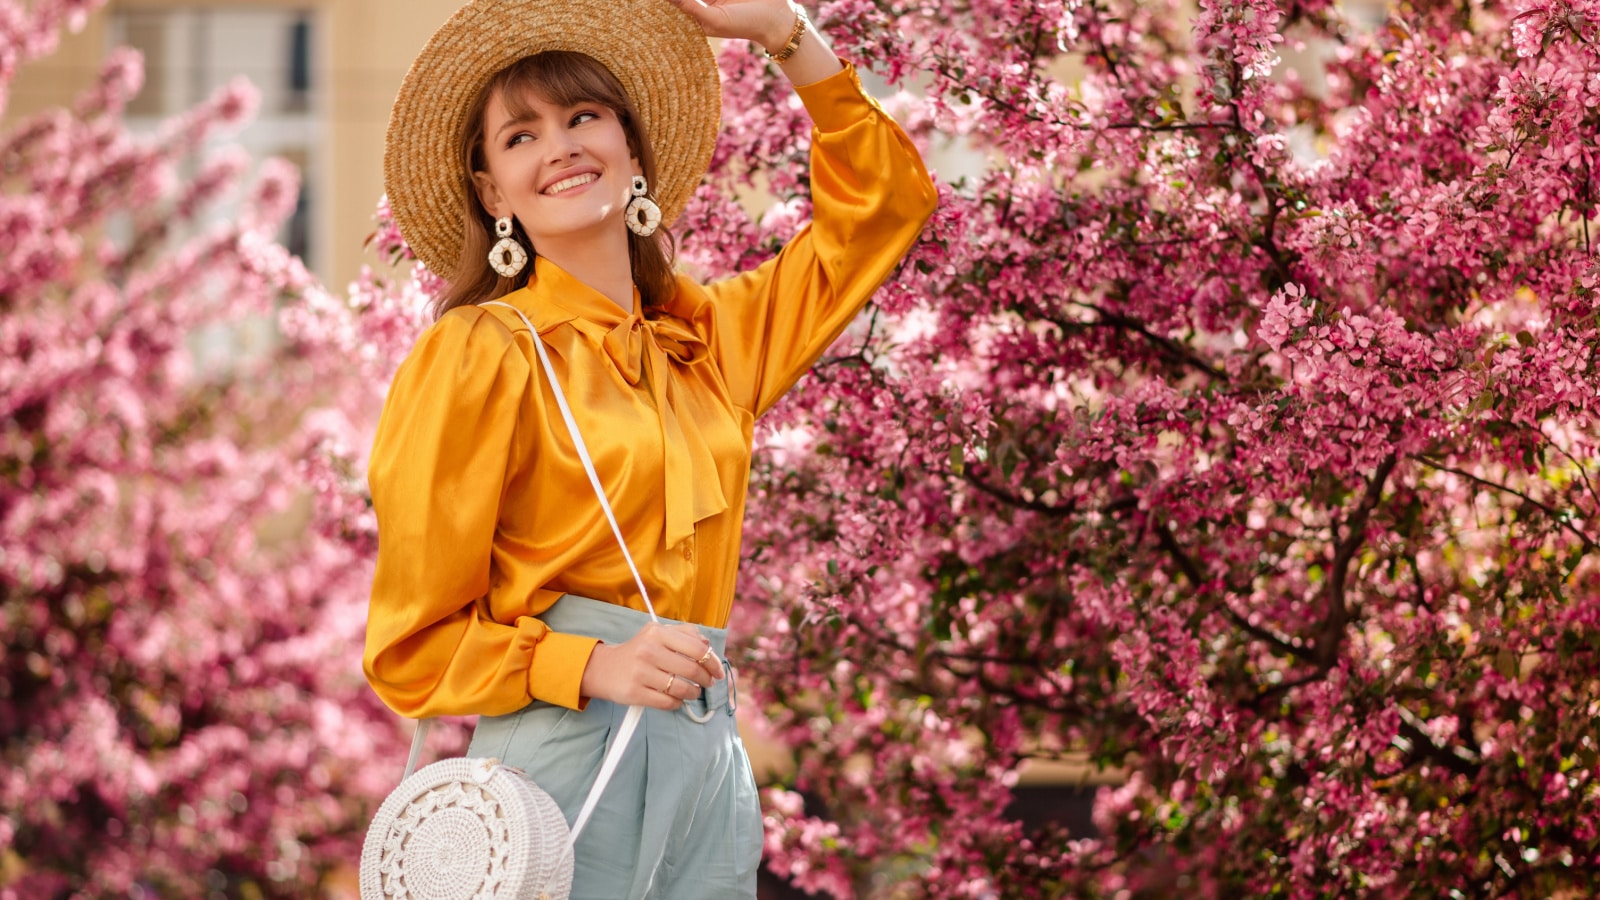 Outdoor lifestyle portrait of elegant happy smiling woman wearing trendy straw hat, yellow satin blouse, blue trousers, with shoulder wicker round bag, walking in street near pink spring blossom trees